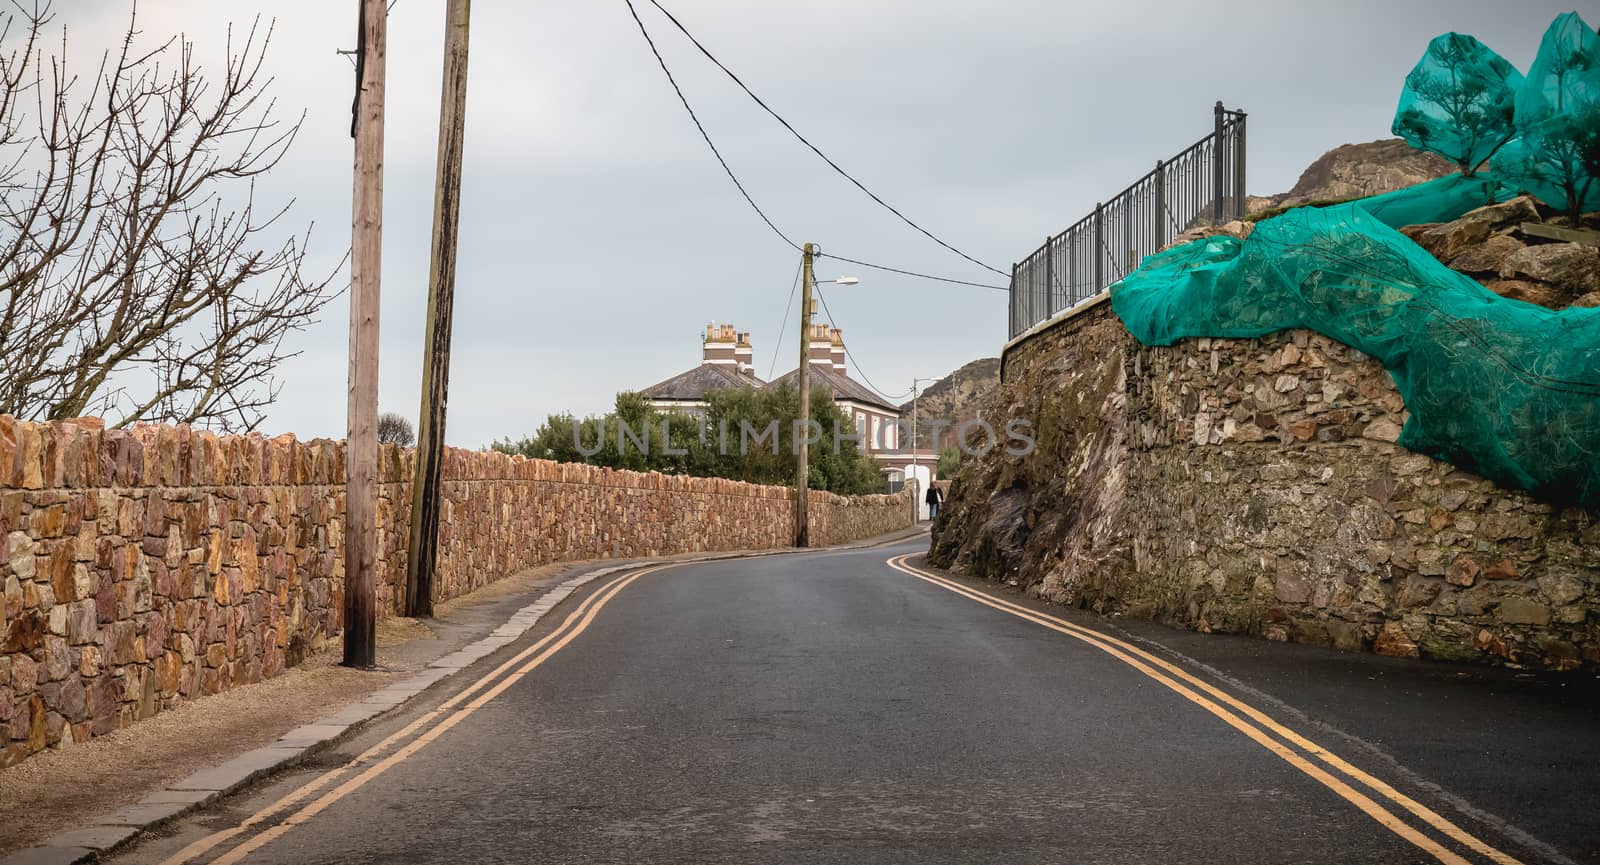 typical seaside lane near the town of Howth, Ireland